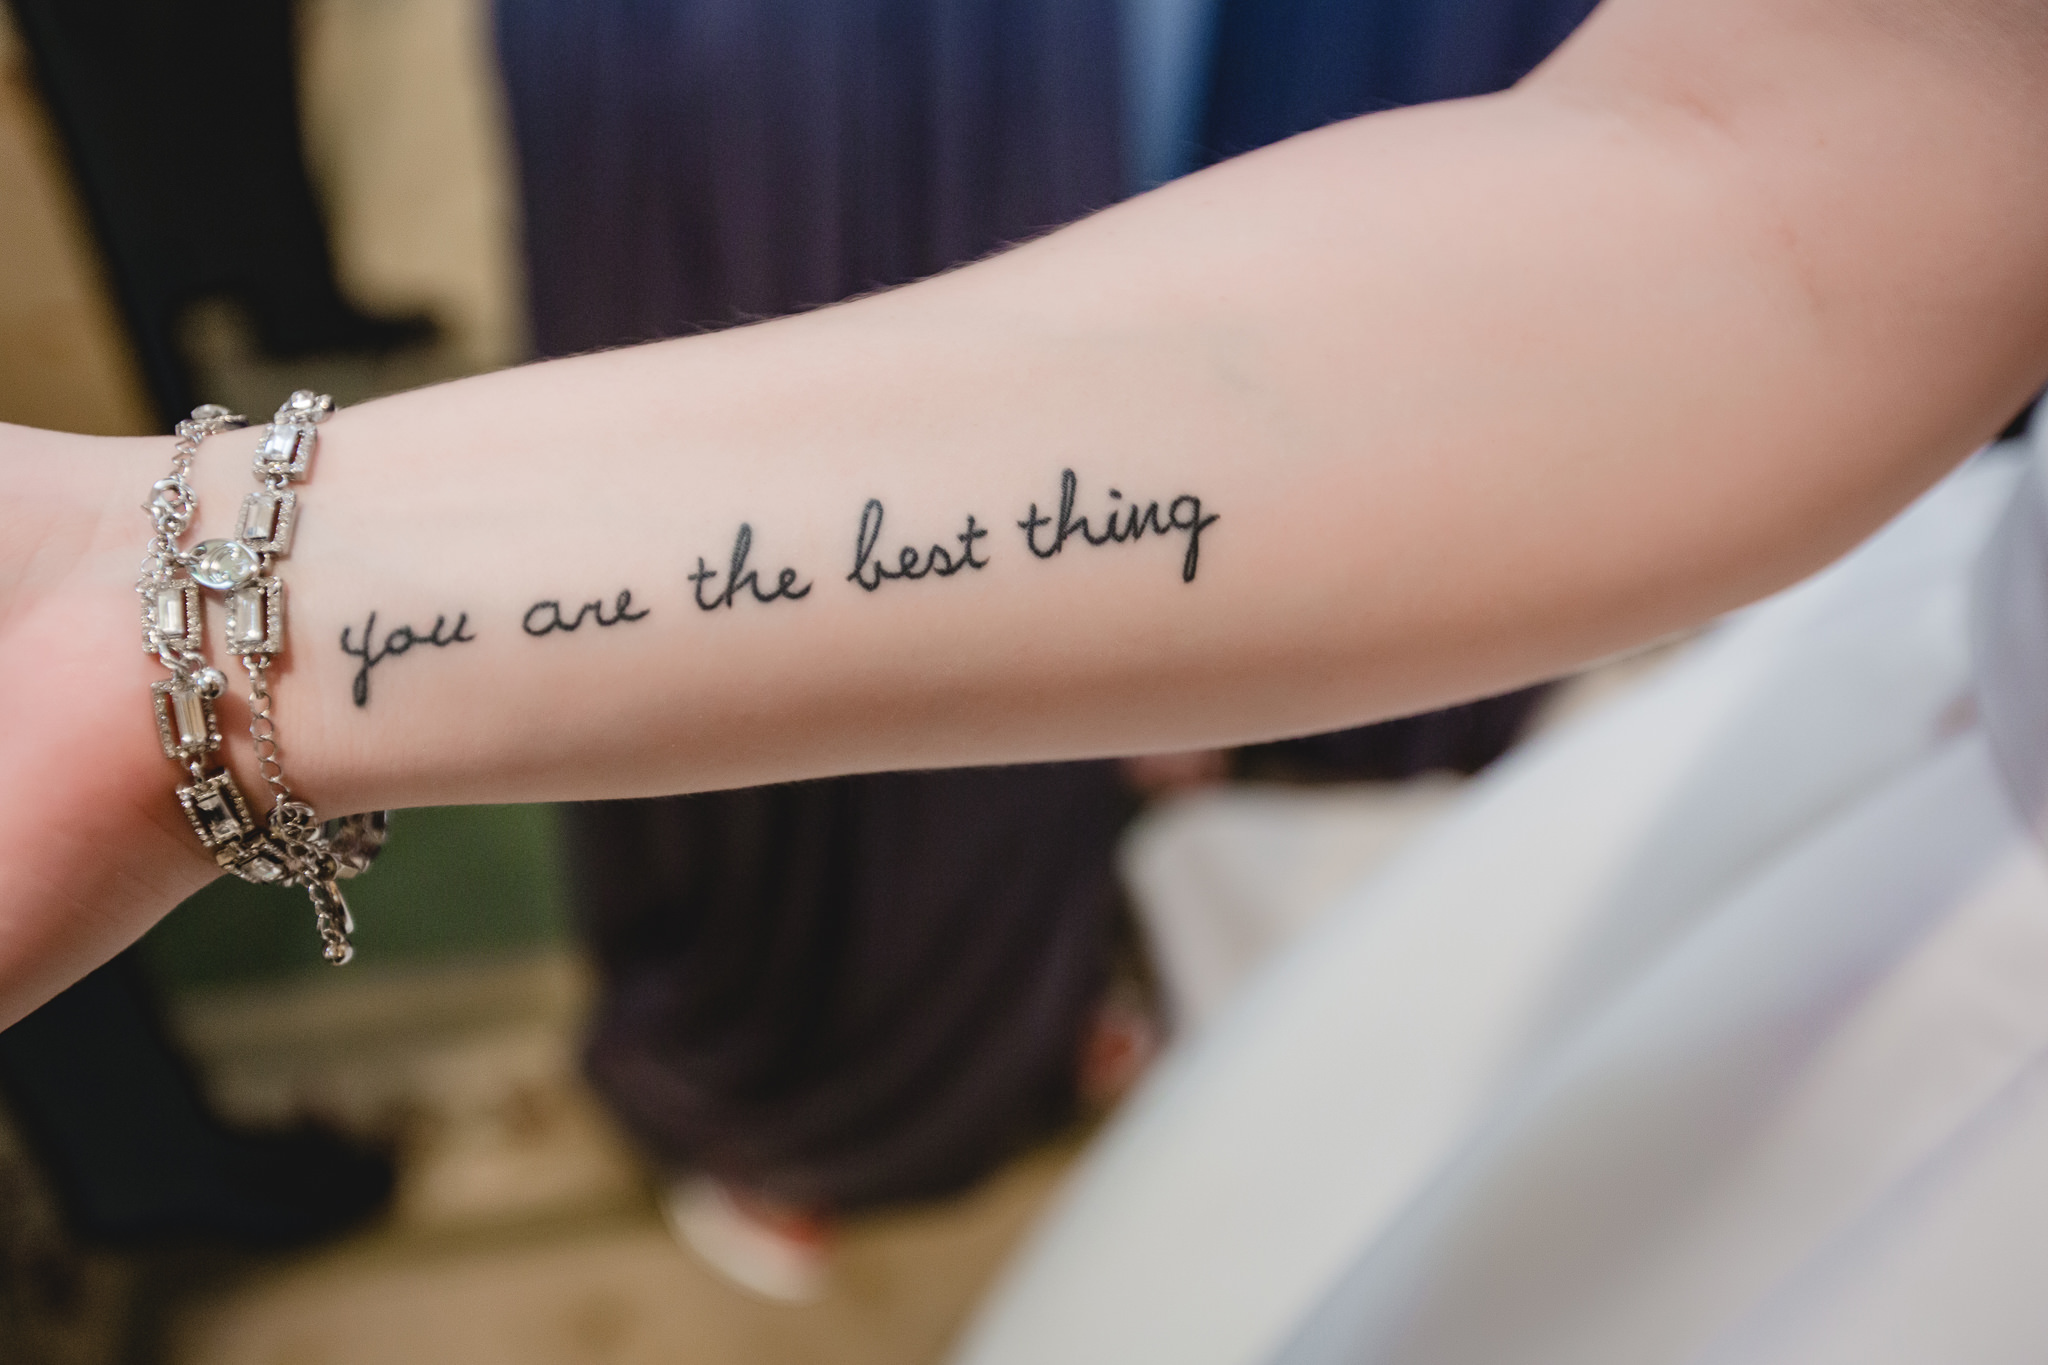 Bride's forearm tattoo says "You are the best thing"